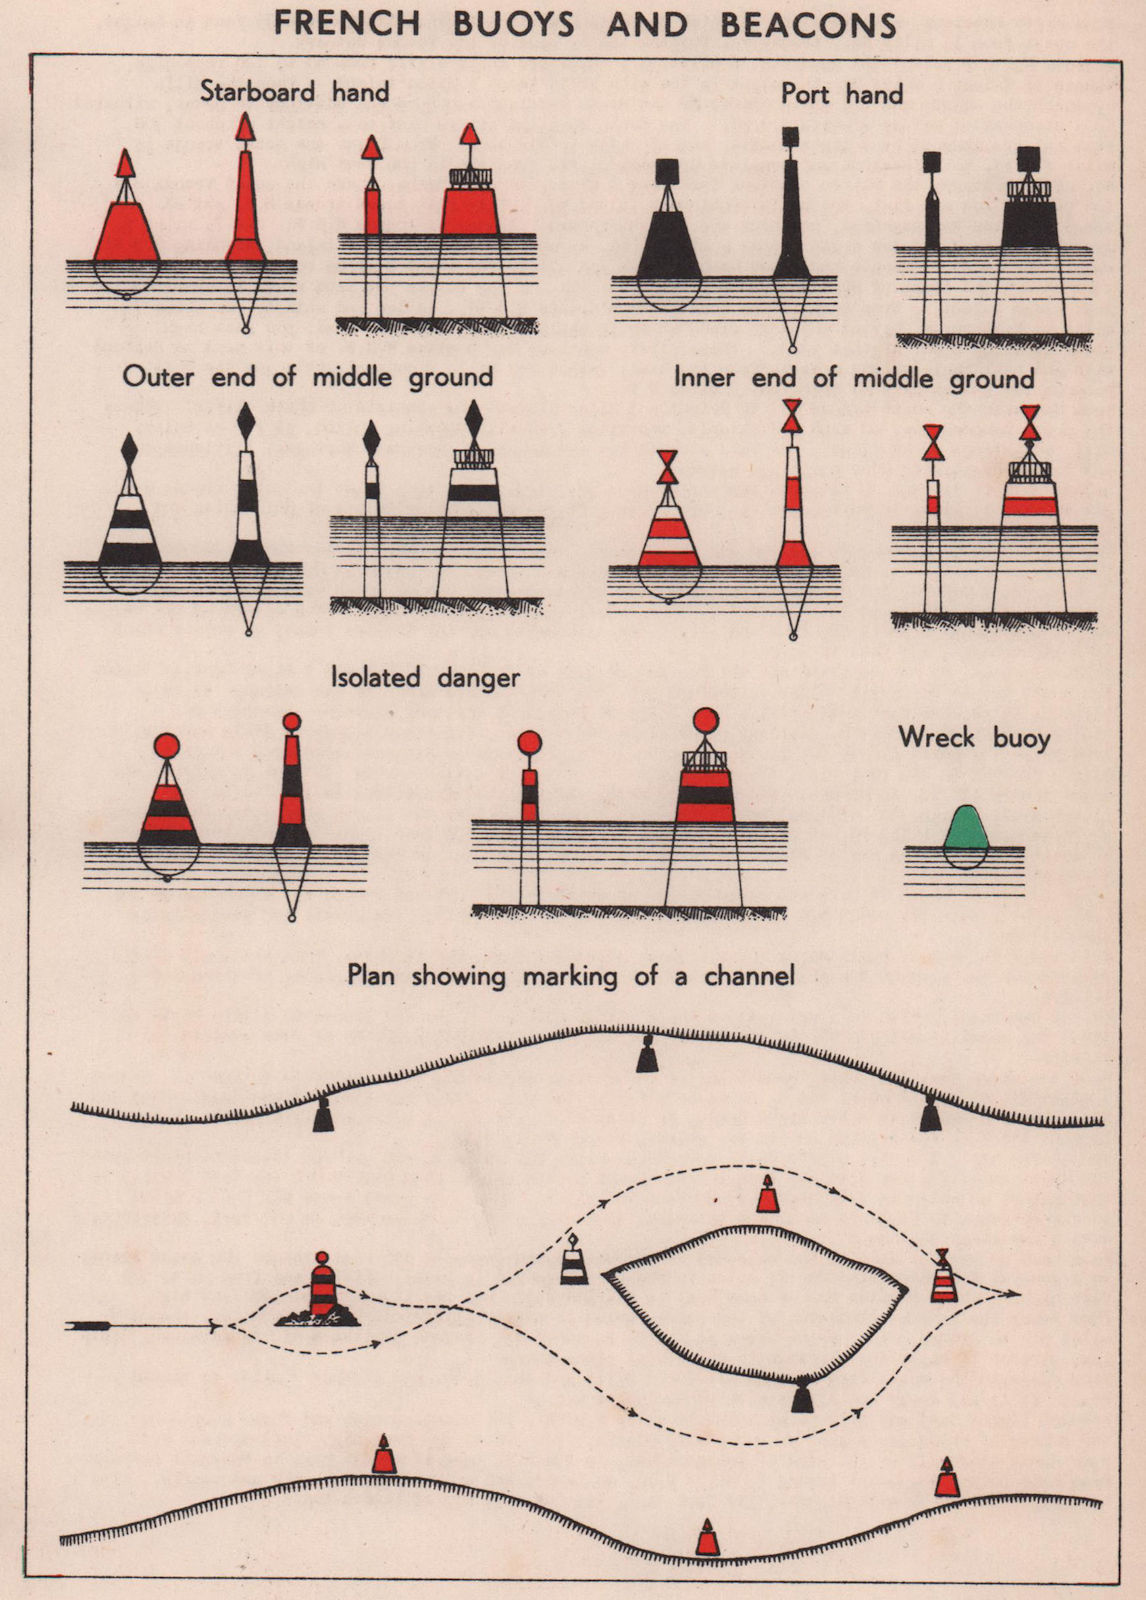 Associate Product Diagram of French Buoyage. French buoys and beacons 1943 old vintage print